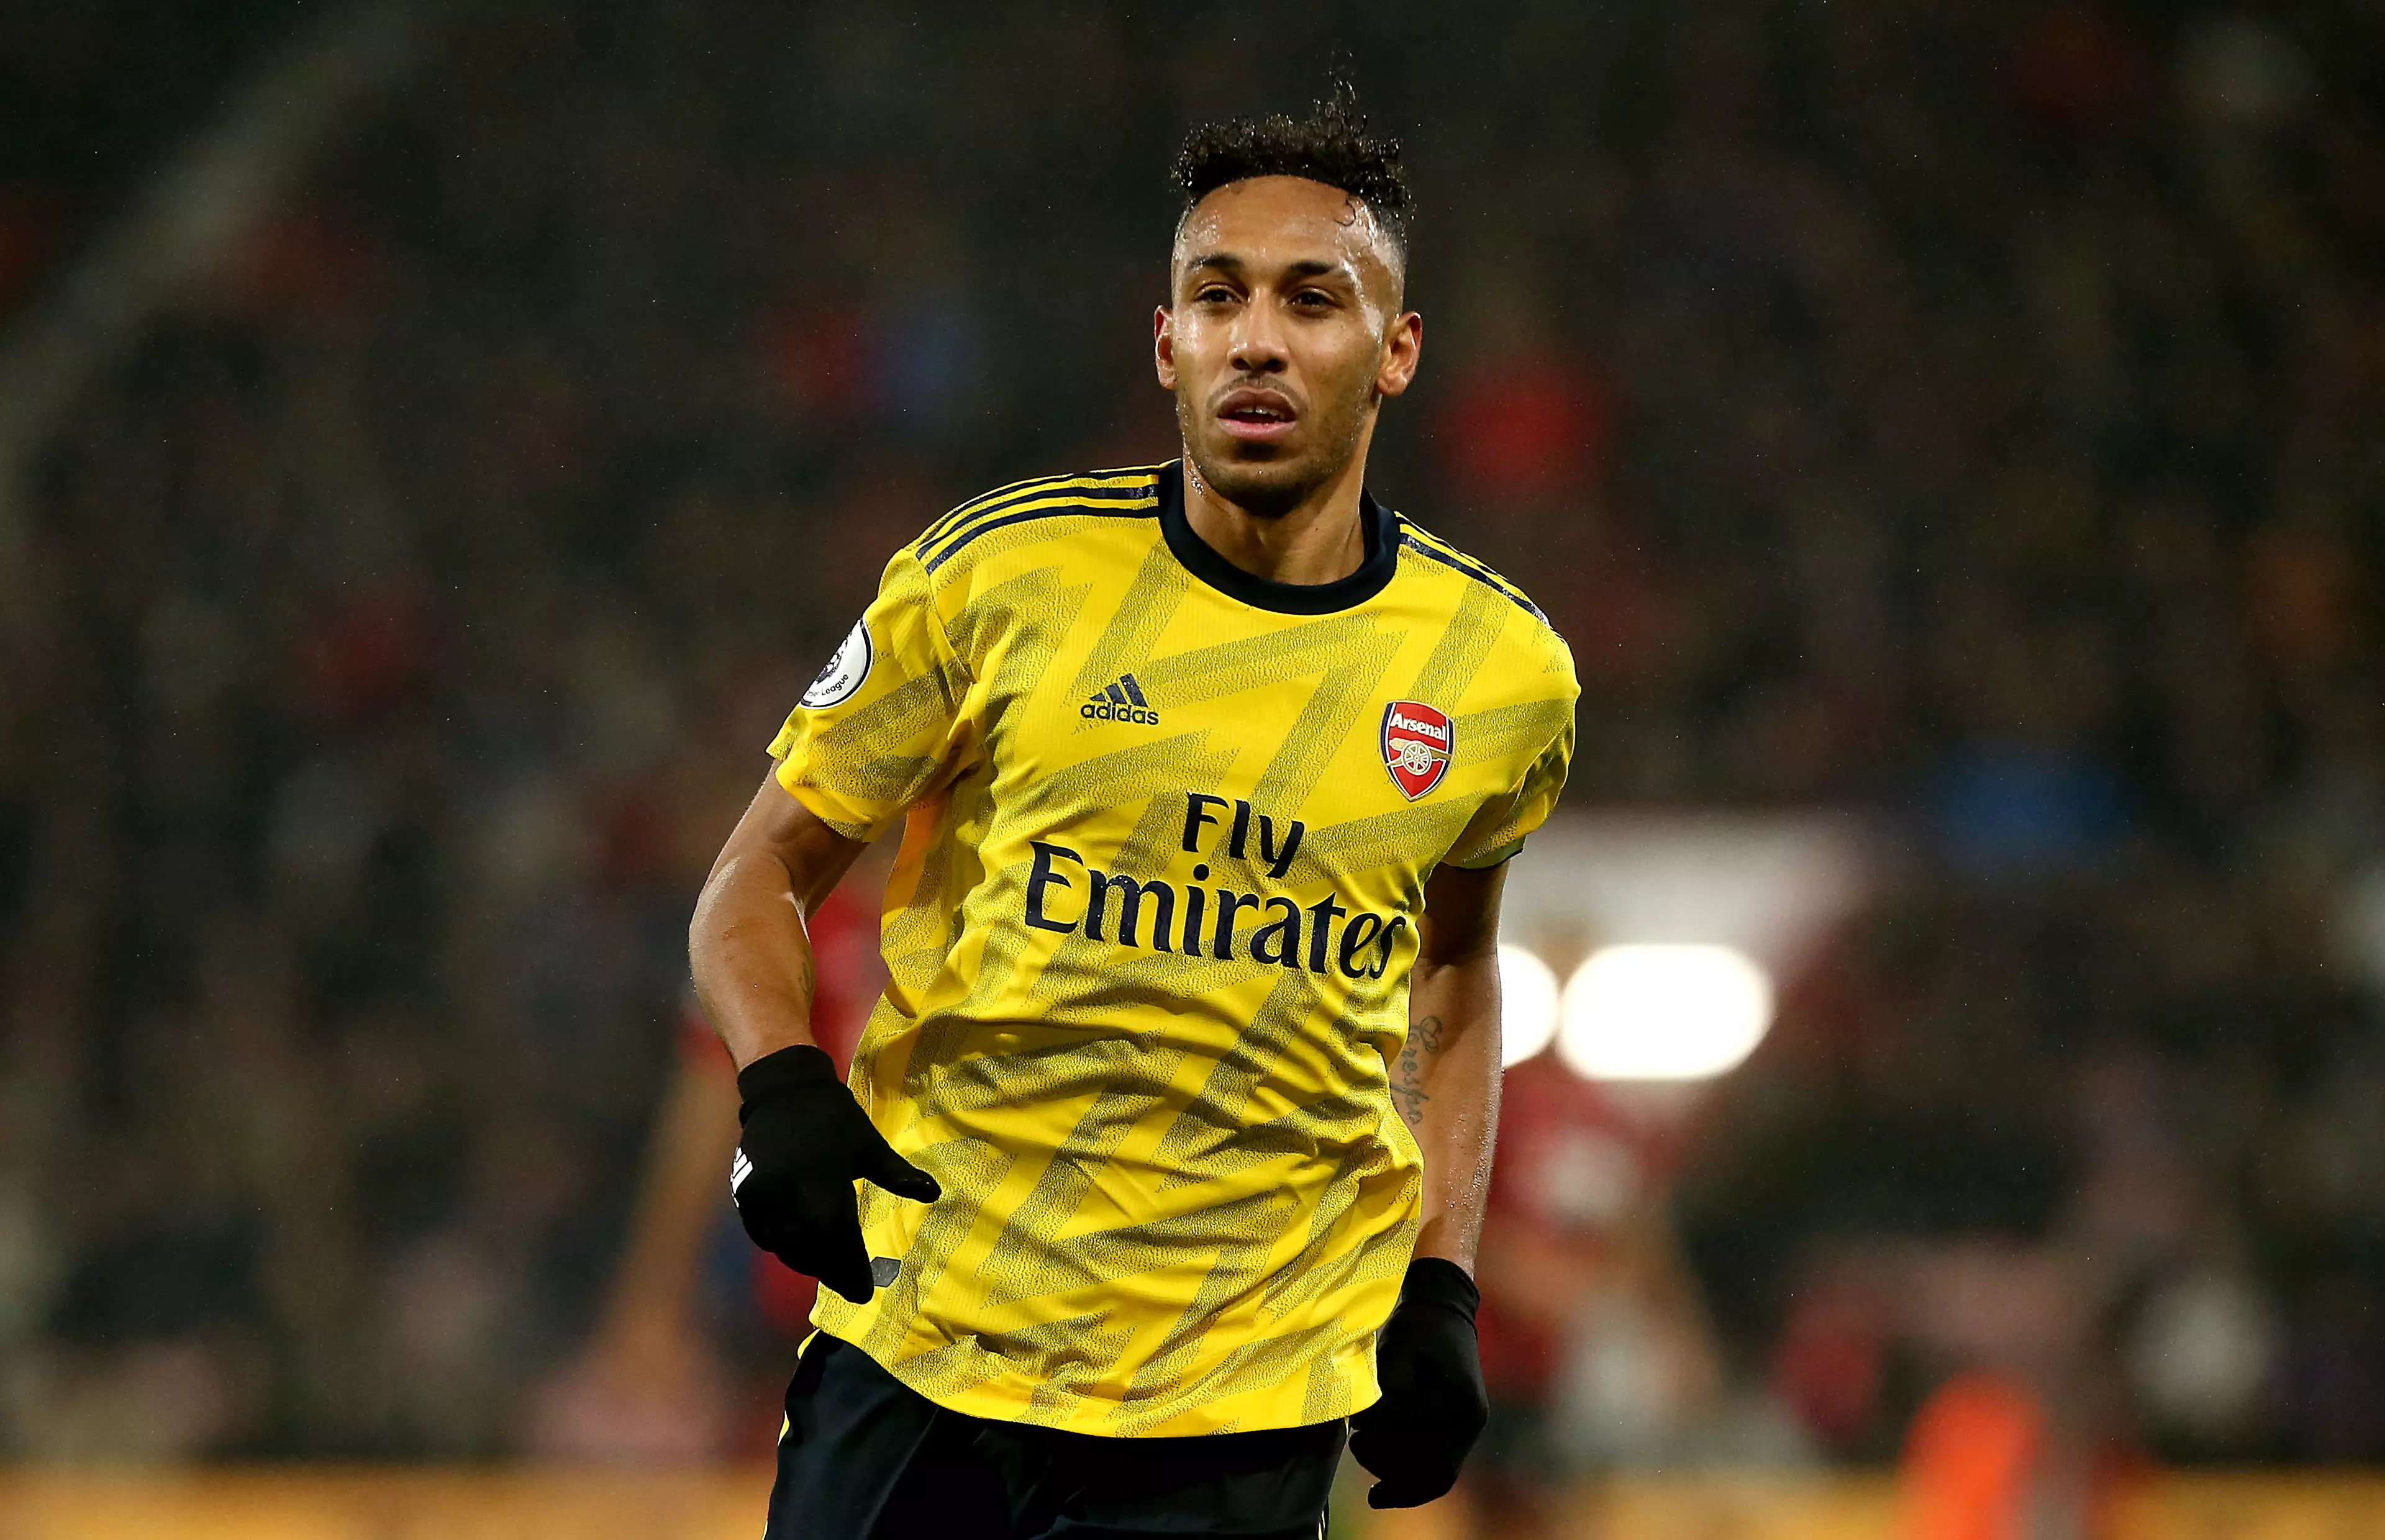 Aubameyang is likely to leave the club this year. Image: PA Images